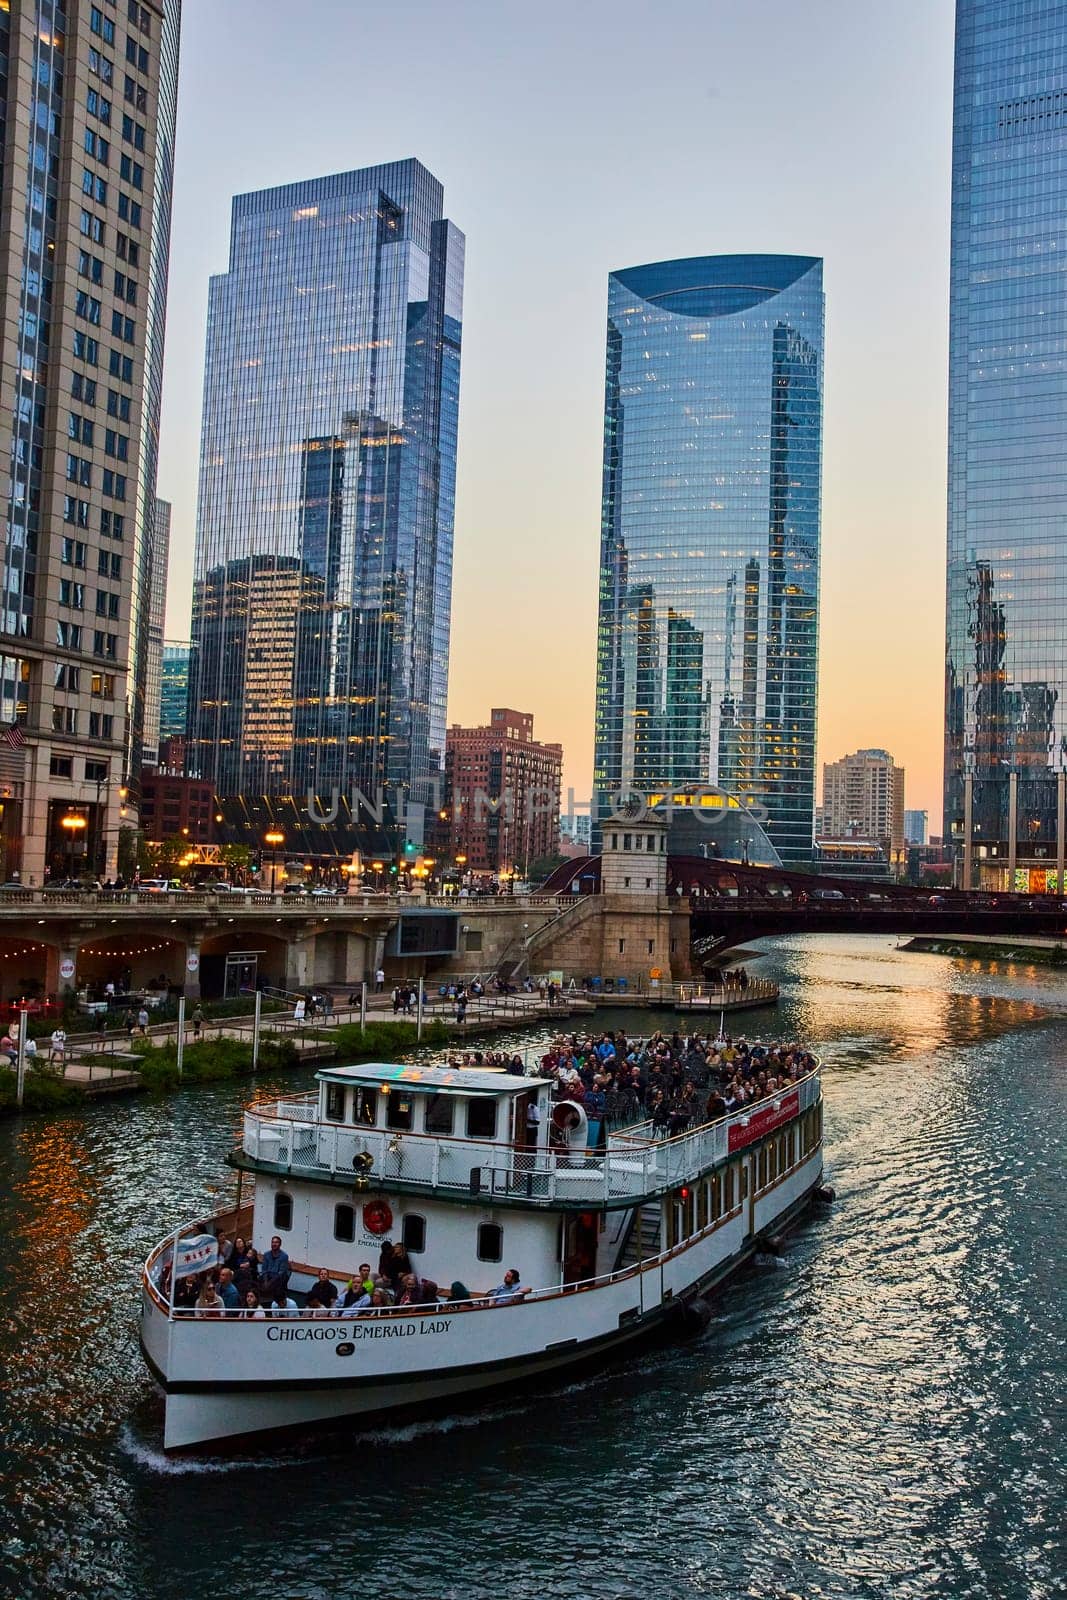 Image of Tour boat with tourists on Chicago canal with reflective dawn light on skyscrapers, IL, USA tourism